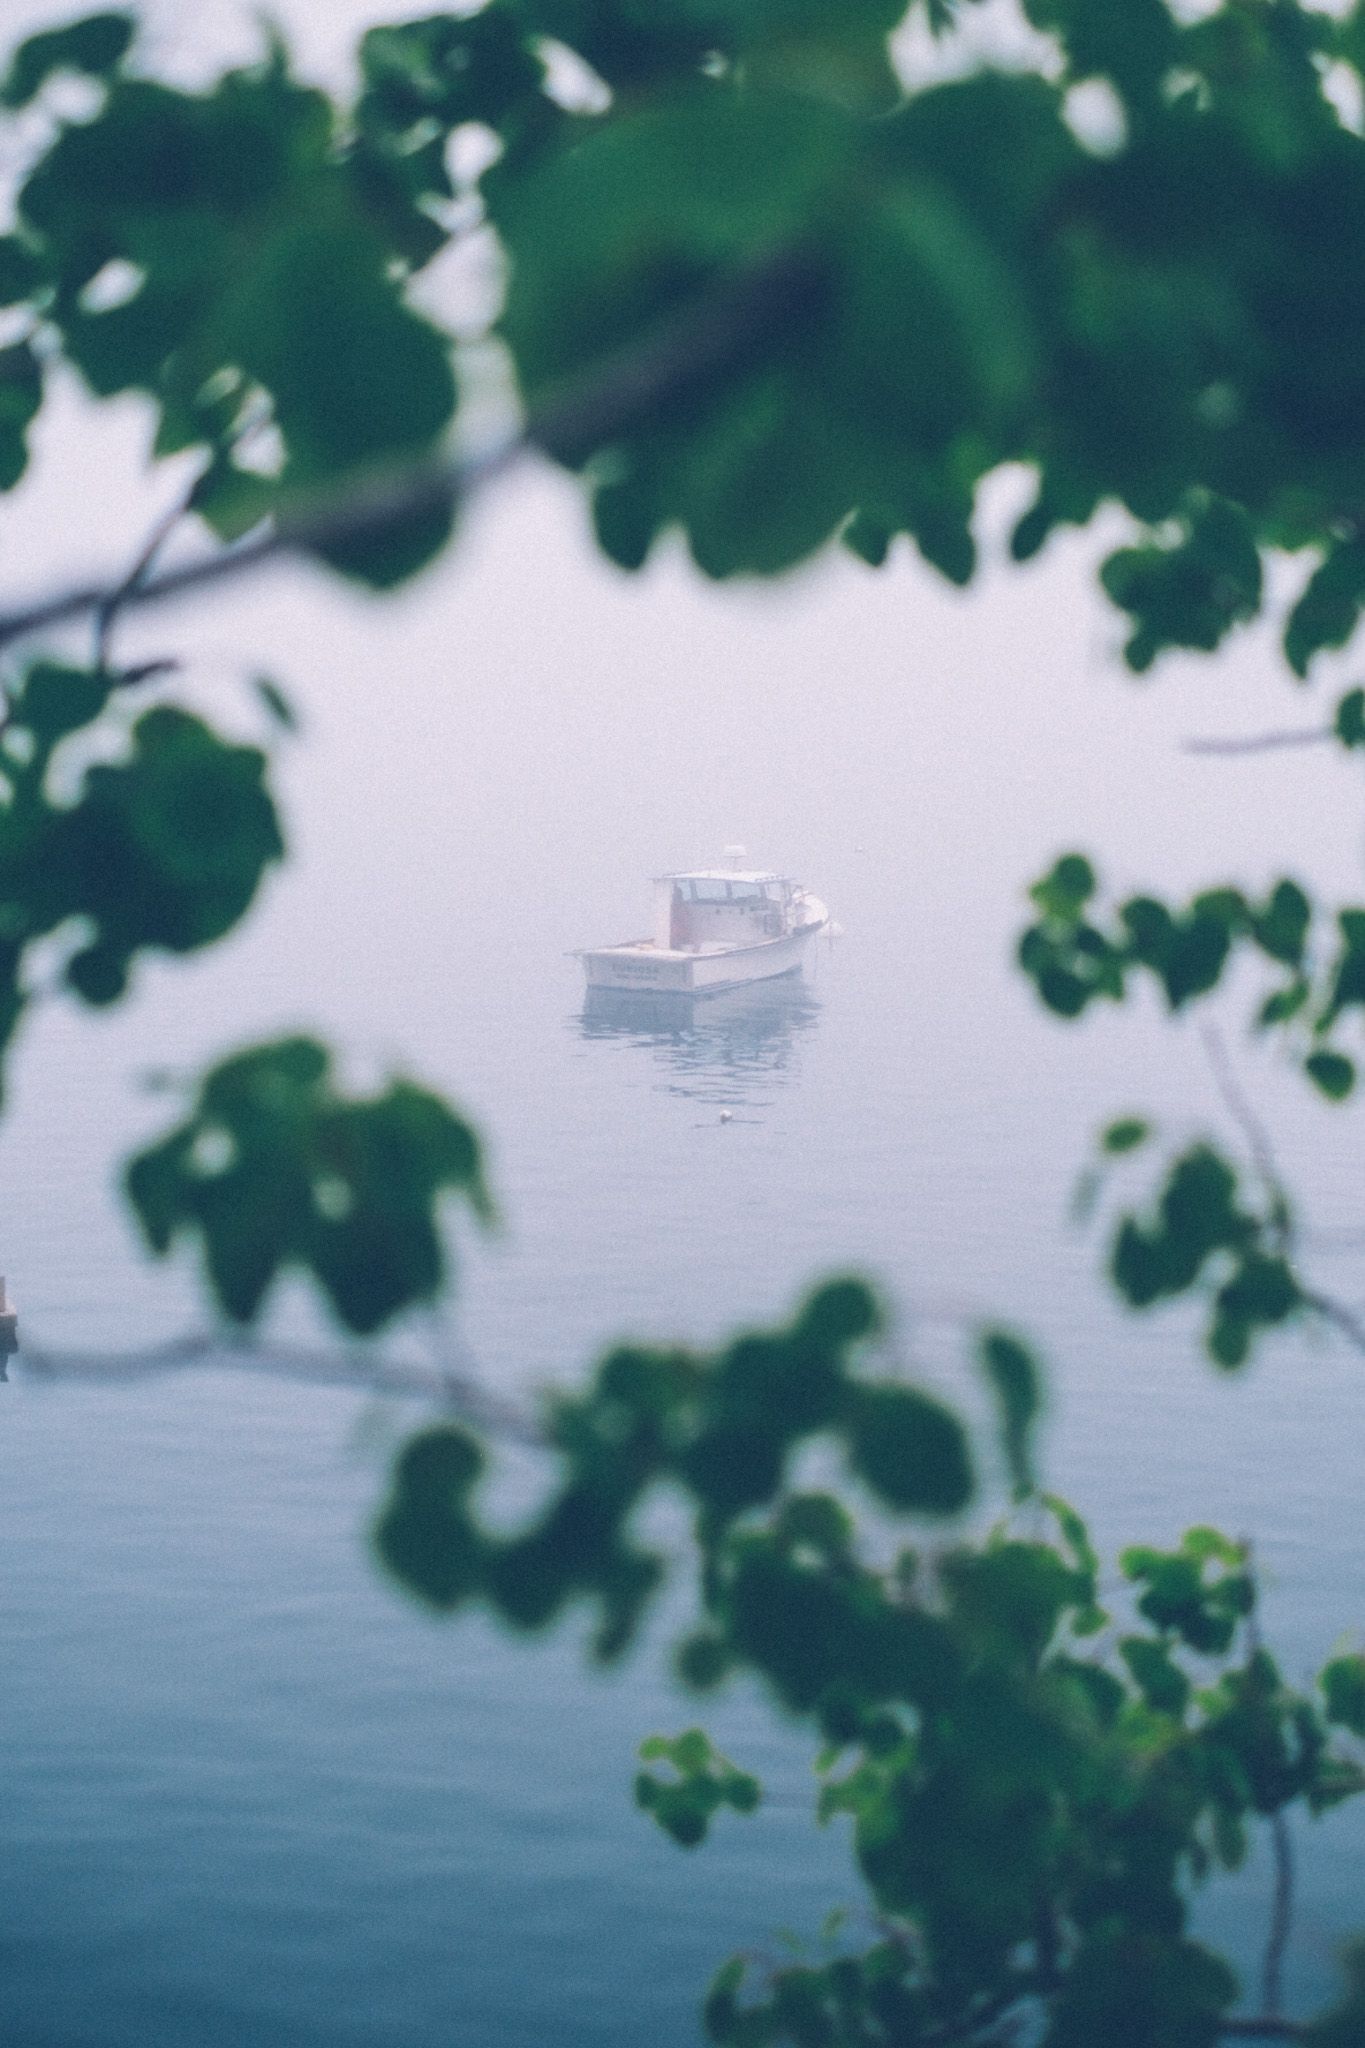 A boat floats in the middle of a foggy harbor, framed by leaves of a tree.